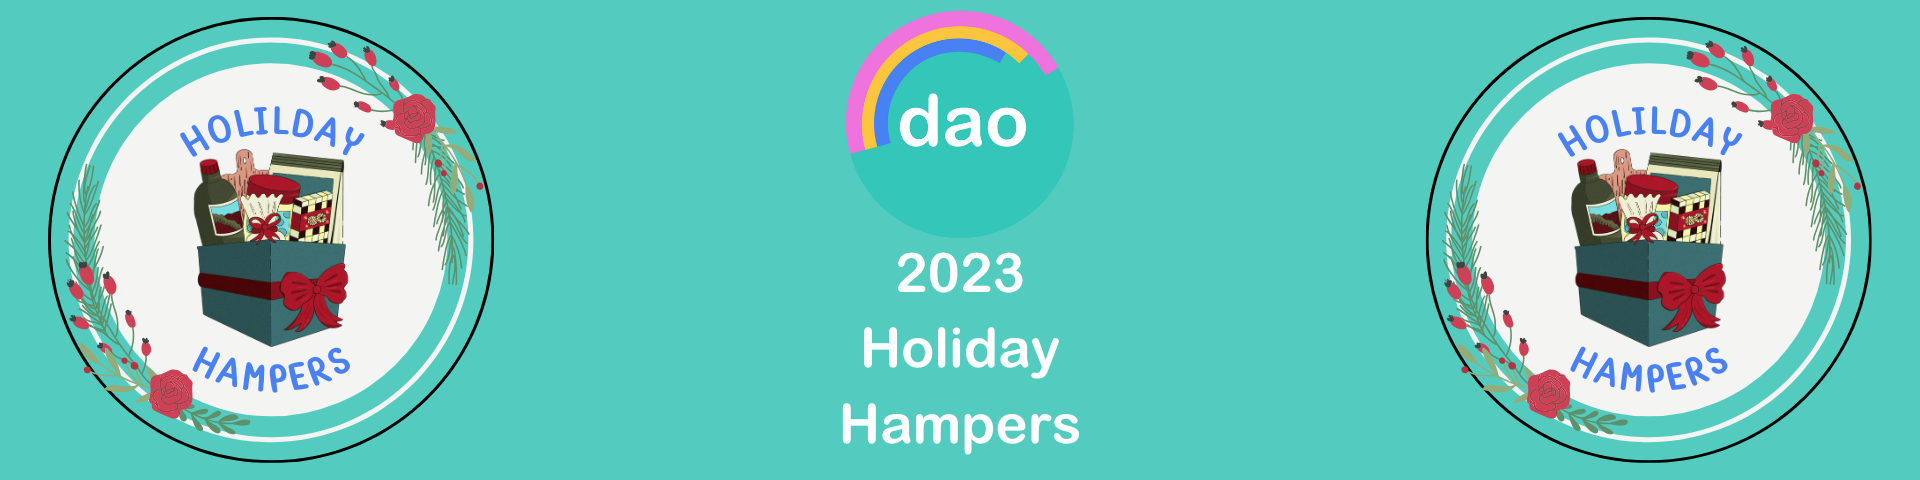 2023 Holiday Hampers Banner